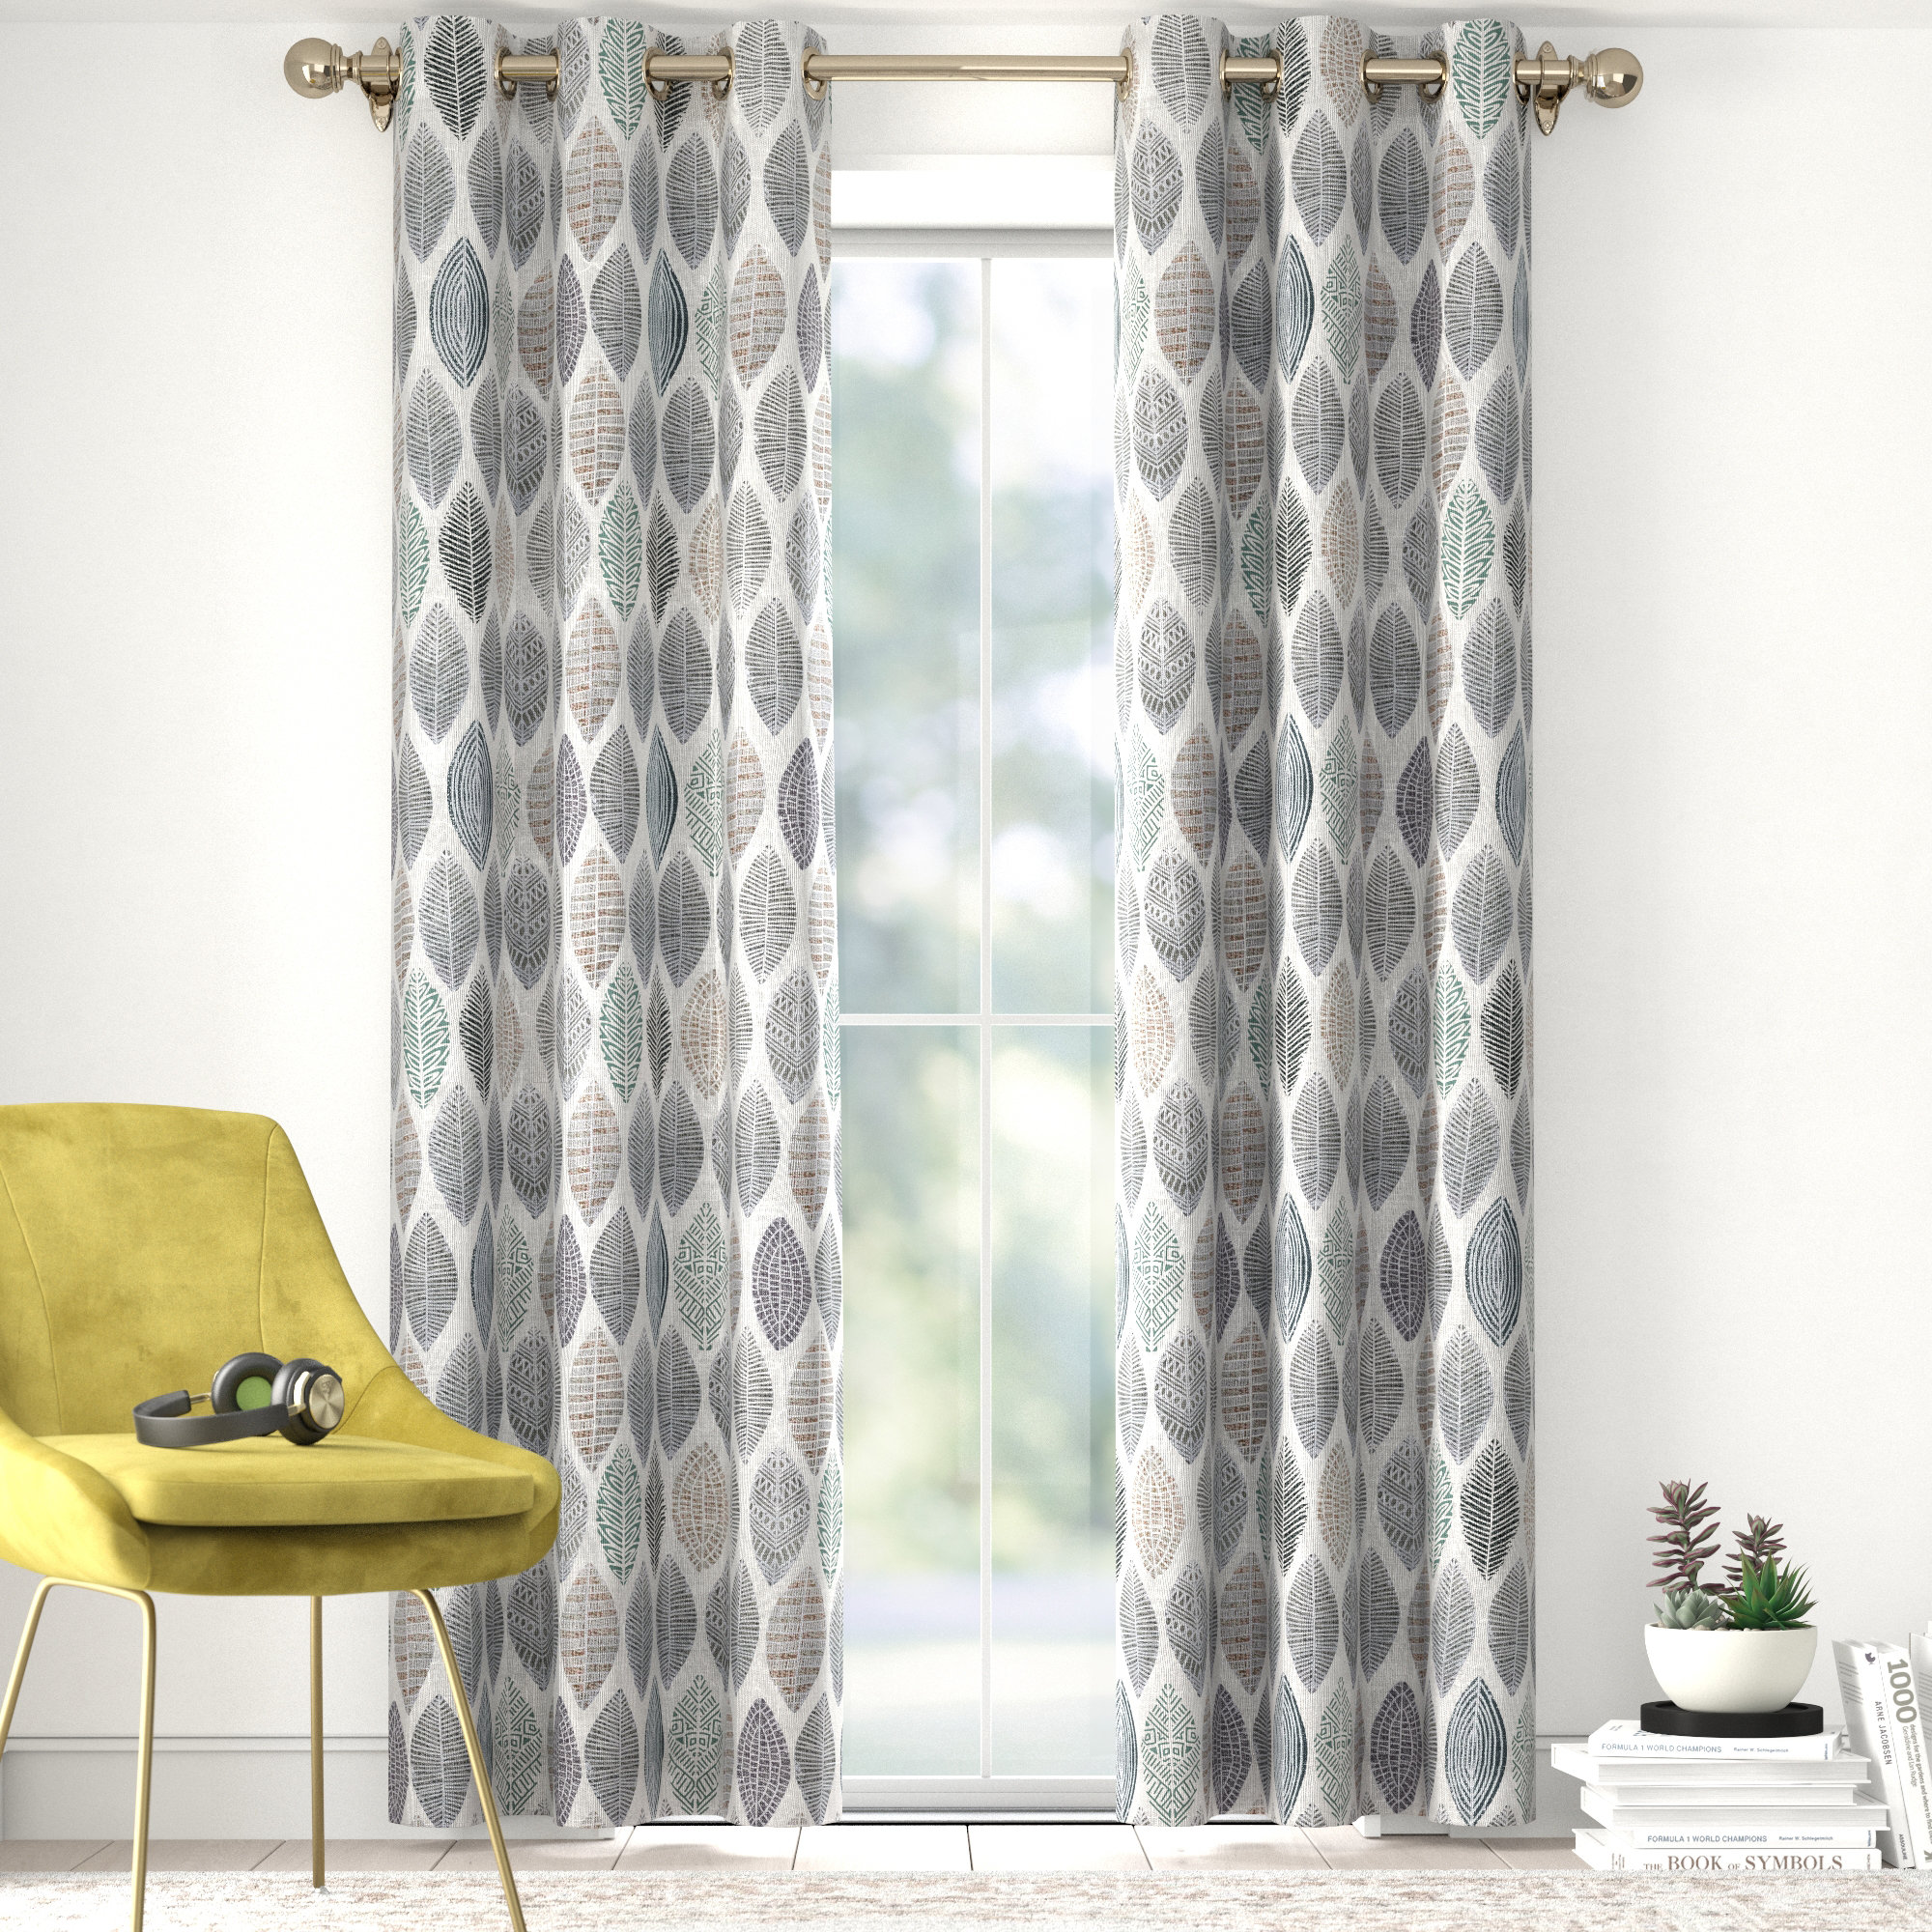 Gold Curtains Panel Striped Patterned Fabric Luxury Bedroom 